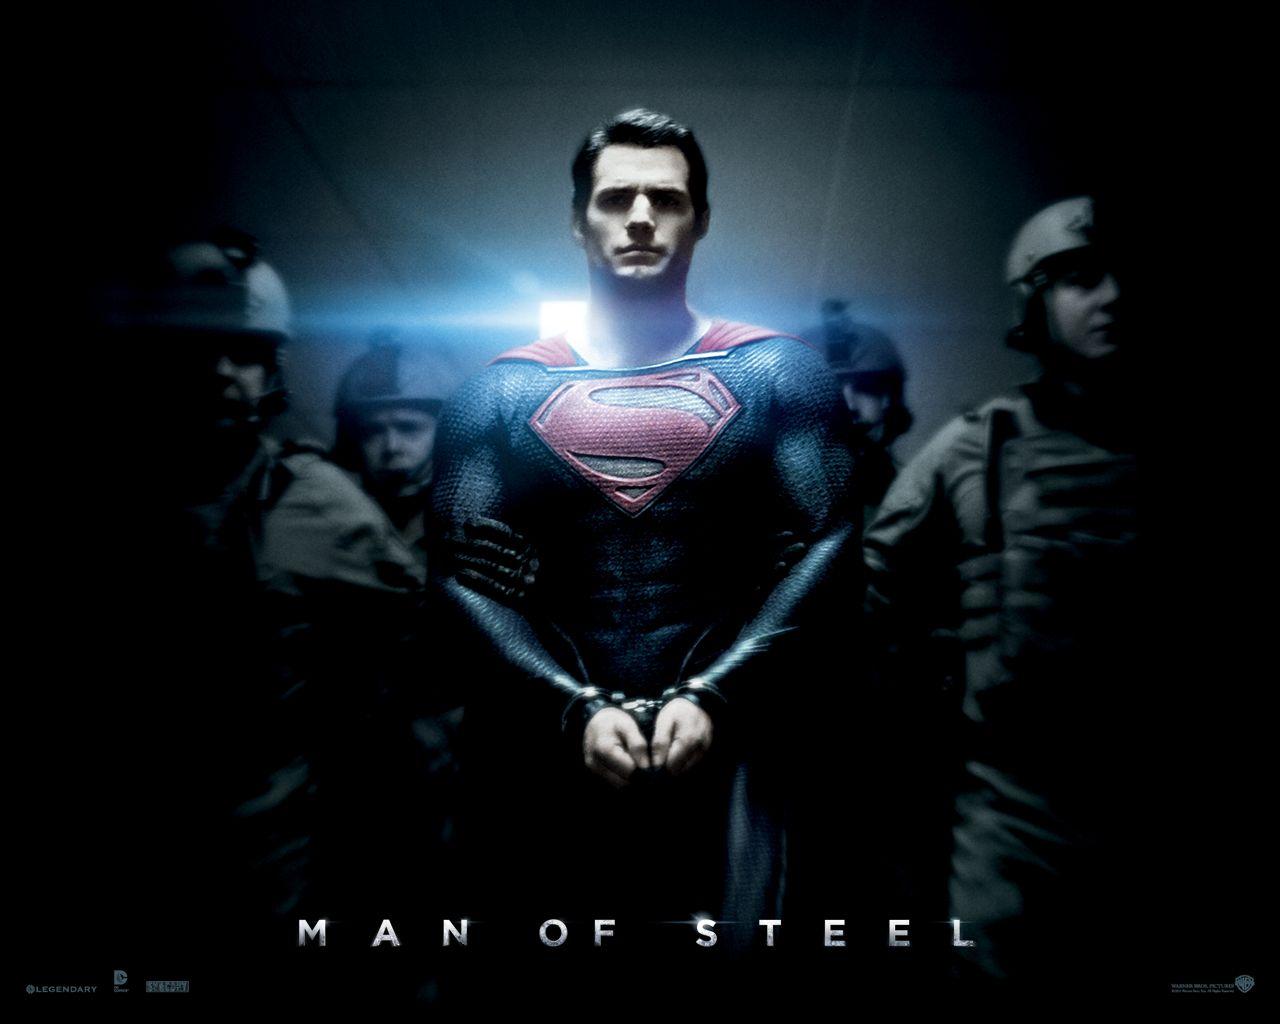 72233 man of steel wallpapers for android, Man of steel Wallpapers